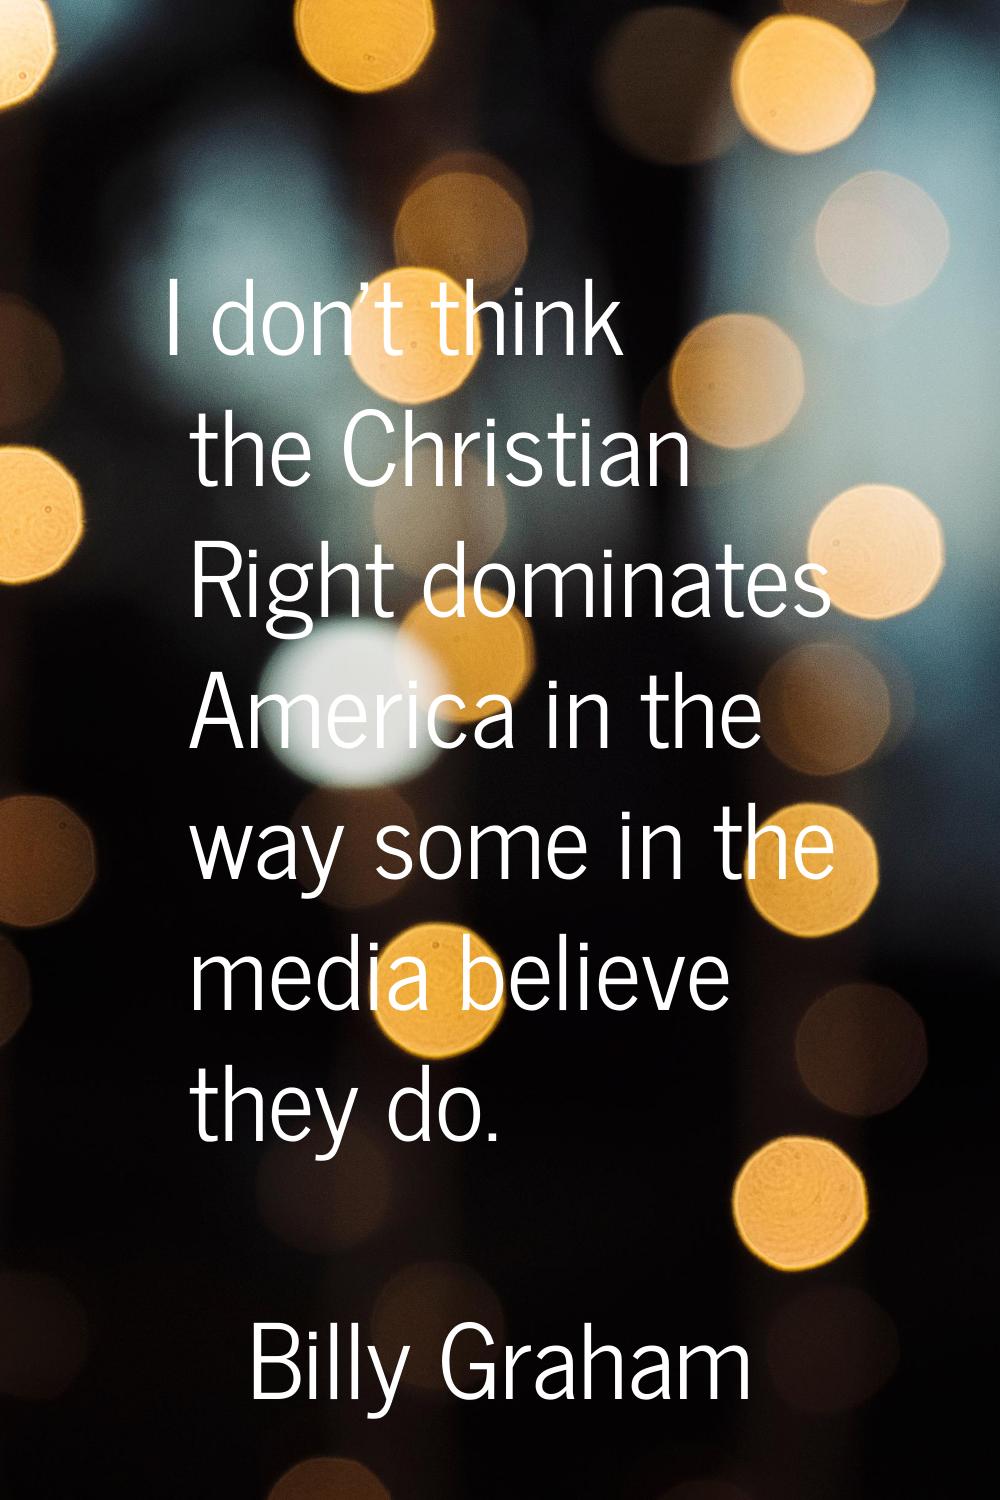 I don't think the Christian Right dominates America in the way some in the media believe they do.